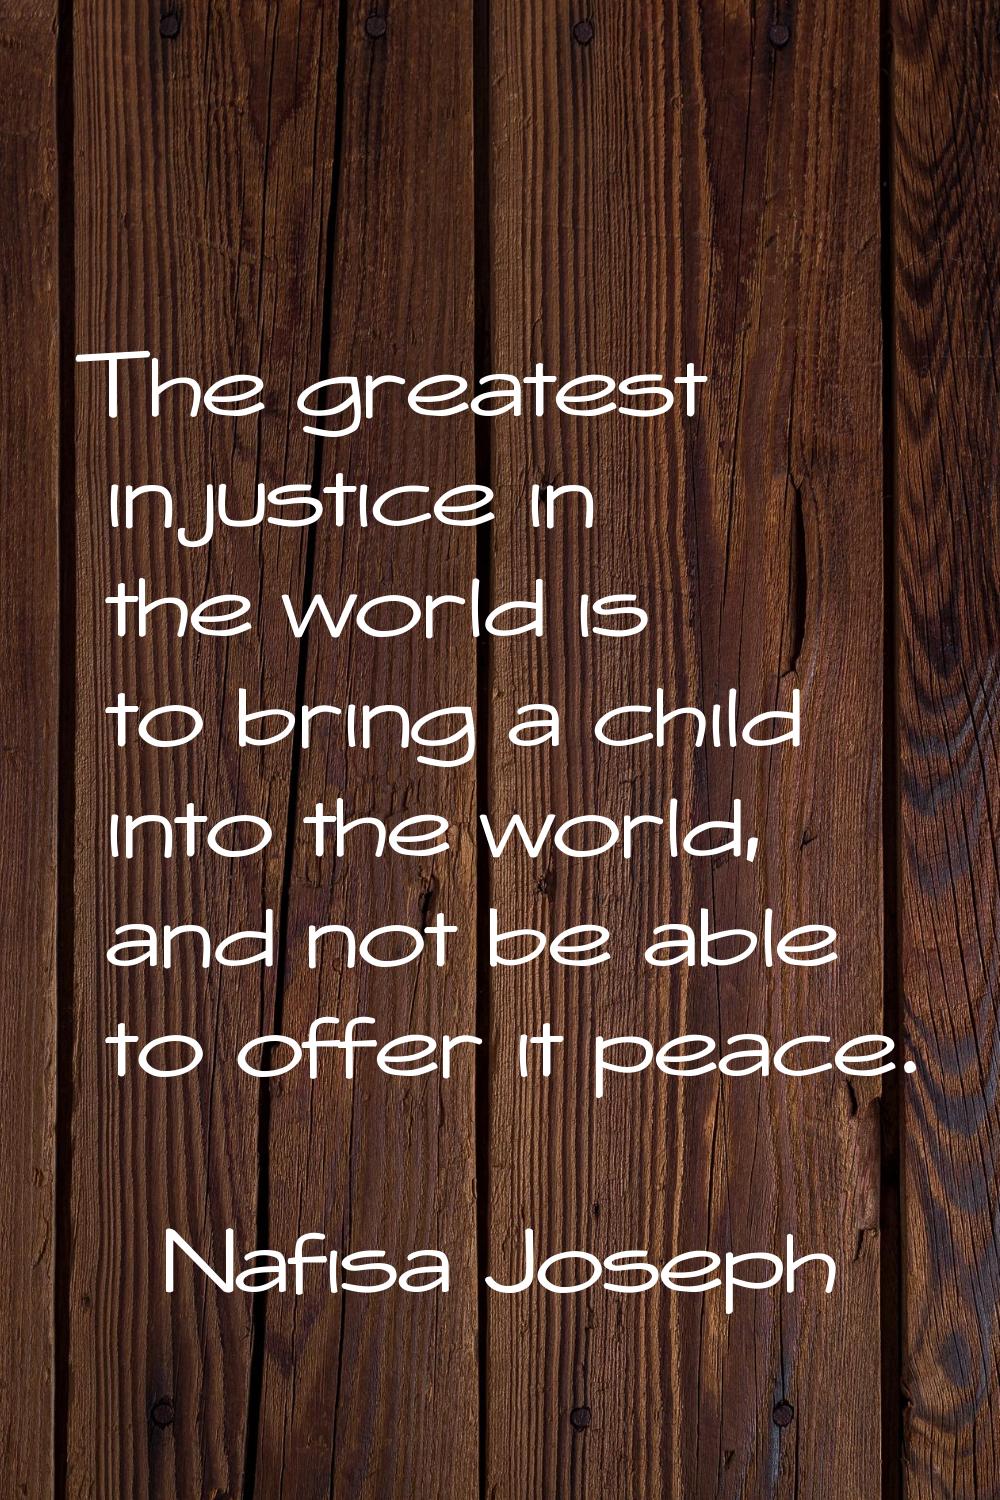 The greatest injustice in the world is to bring a child into the world, and not be able to offer it